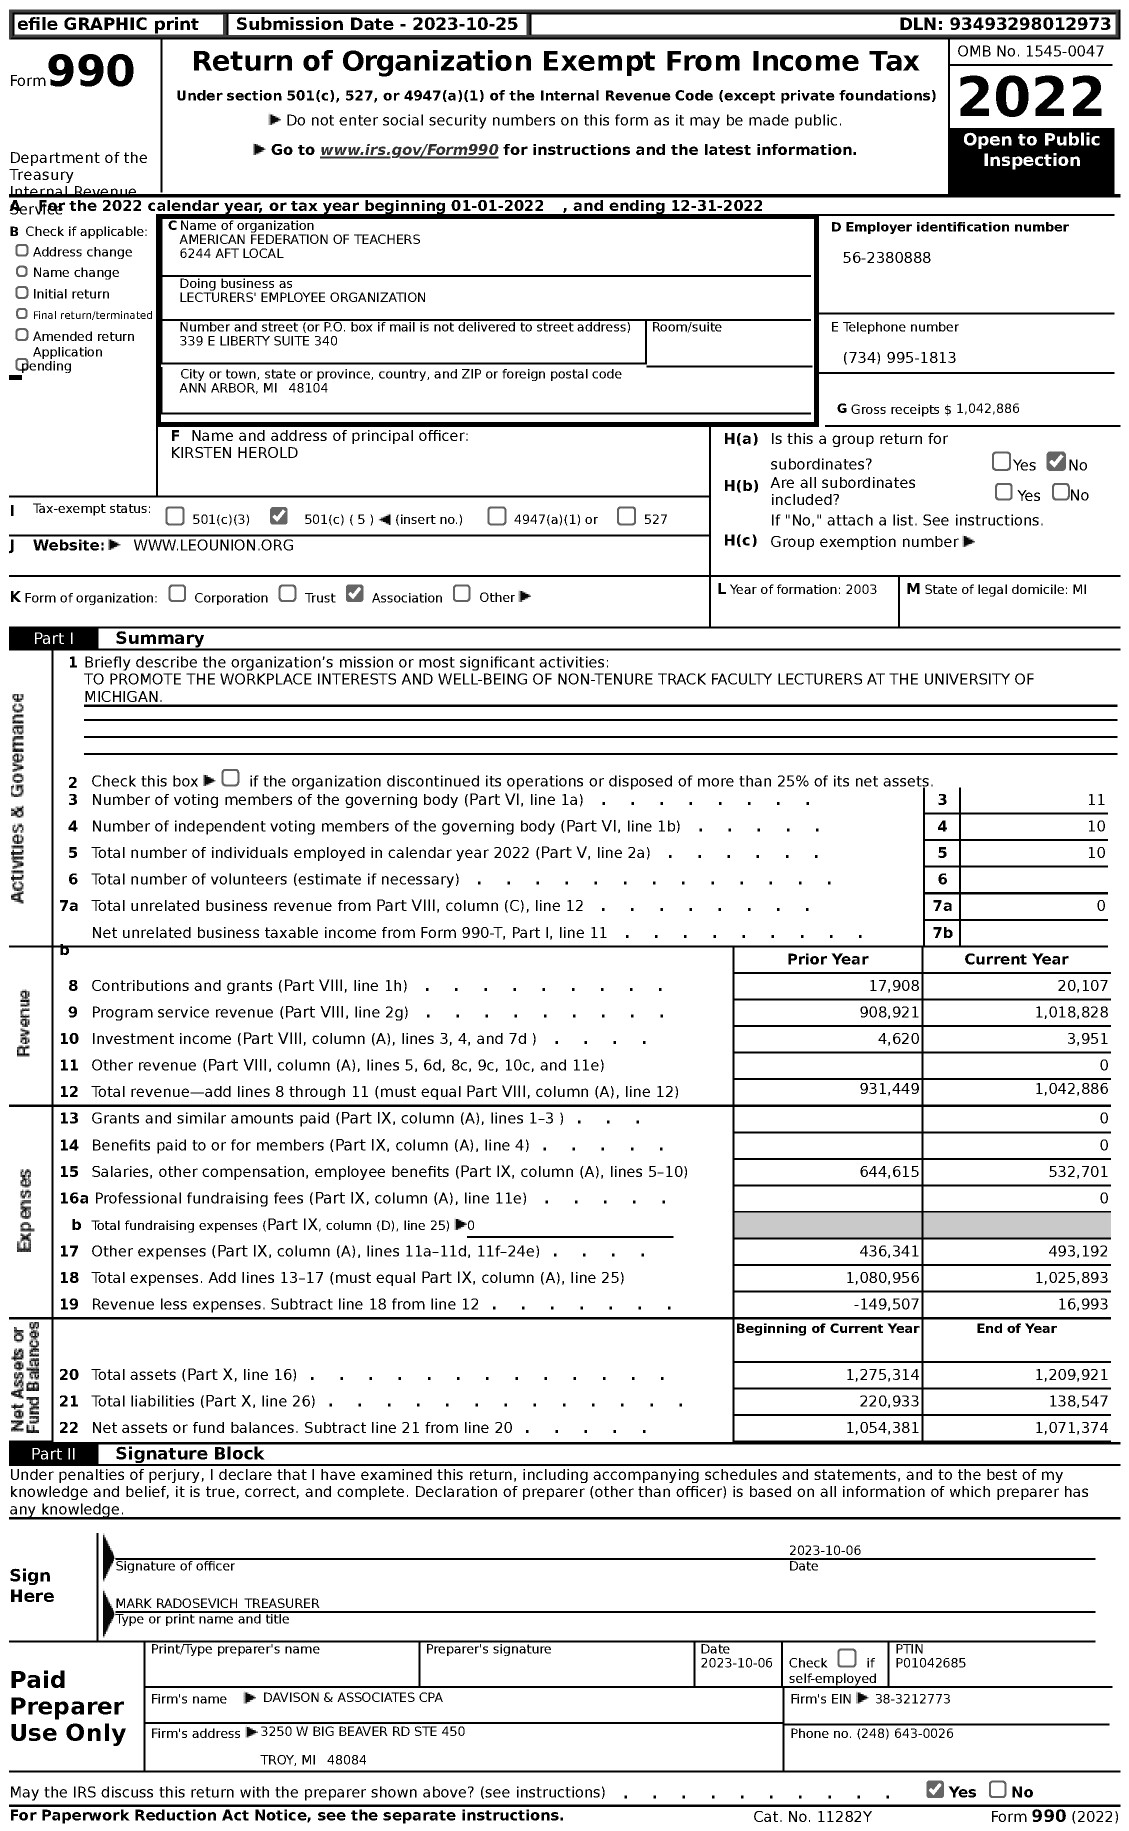 Image of first page of 2022 Form 990 for American Federation of Teachers - Lecturers' Employee Organization